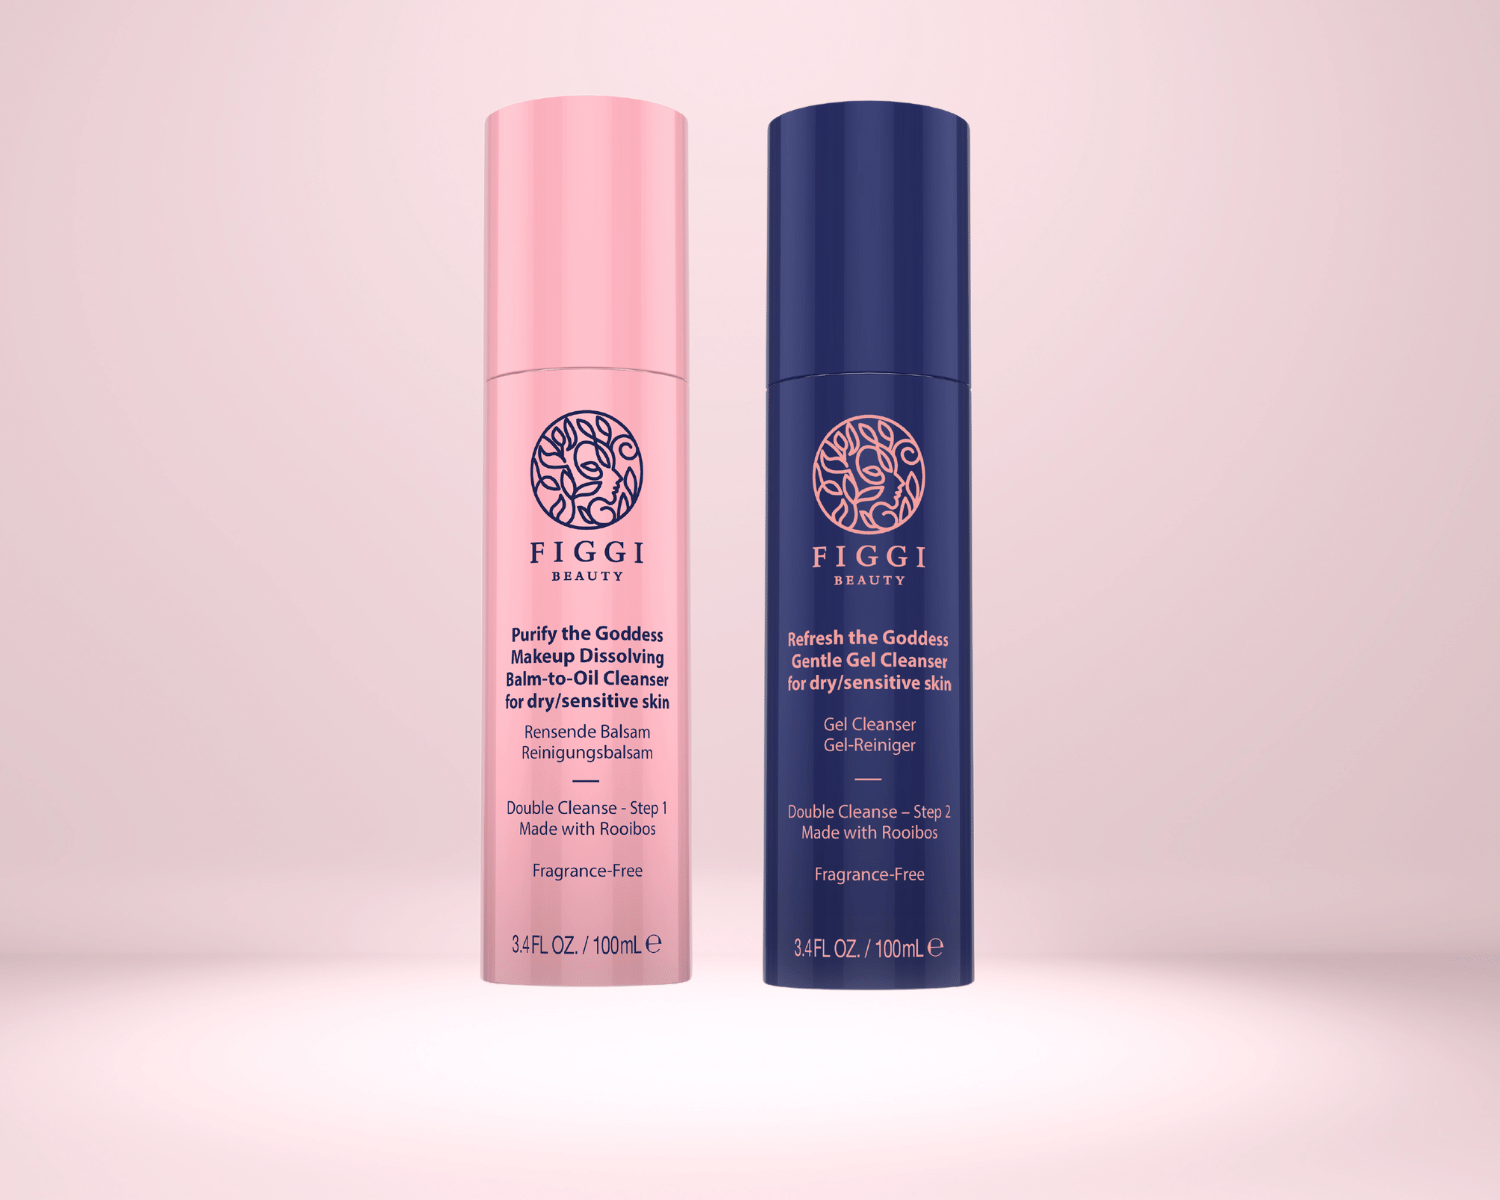 FIGGI Beauty Sensi-Soul Regimen Double Cleanse. Purify the Goddess Makeup Dissolving Balm-to-Oil and Refresh the Goddess Gentle Gel Cleanser.